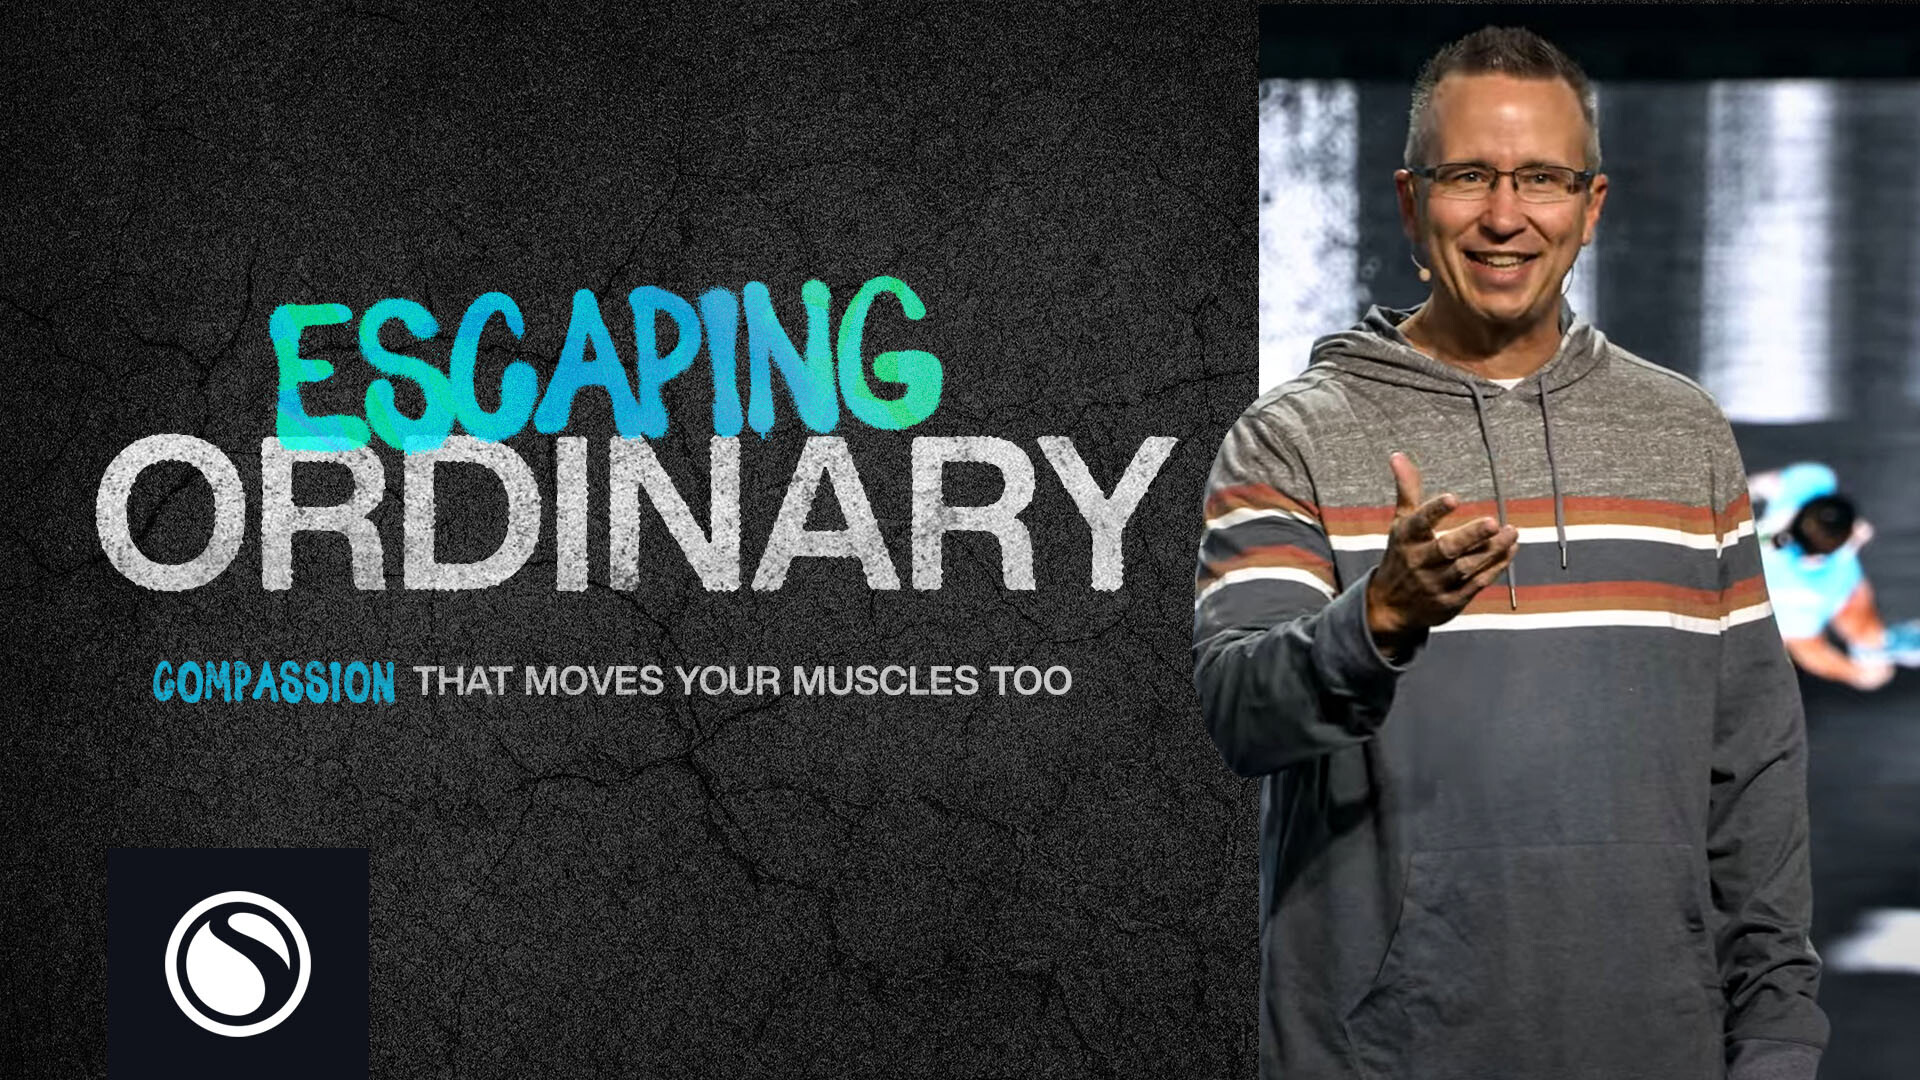 Watch Escaping Ordinary - Compassion That Moves Your Muscles Too